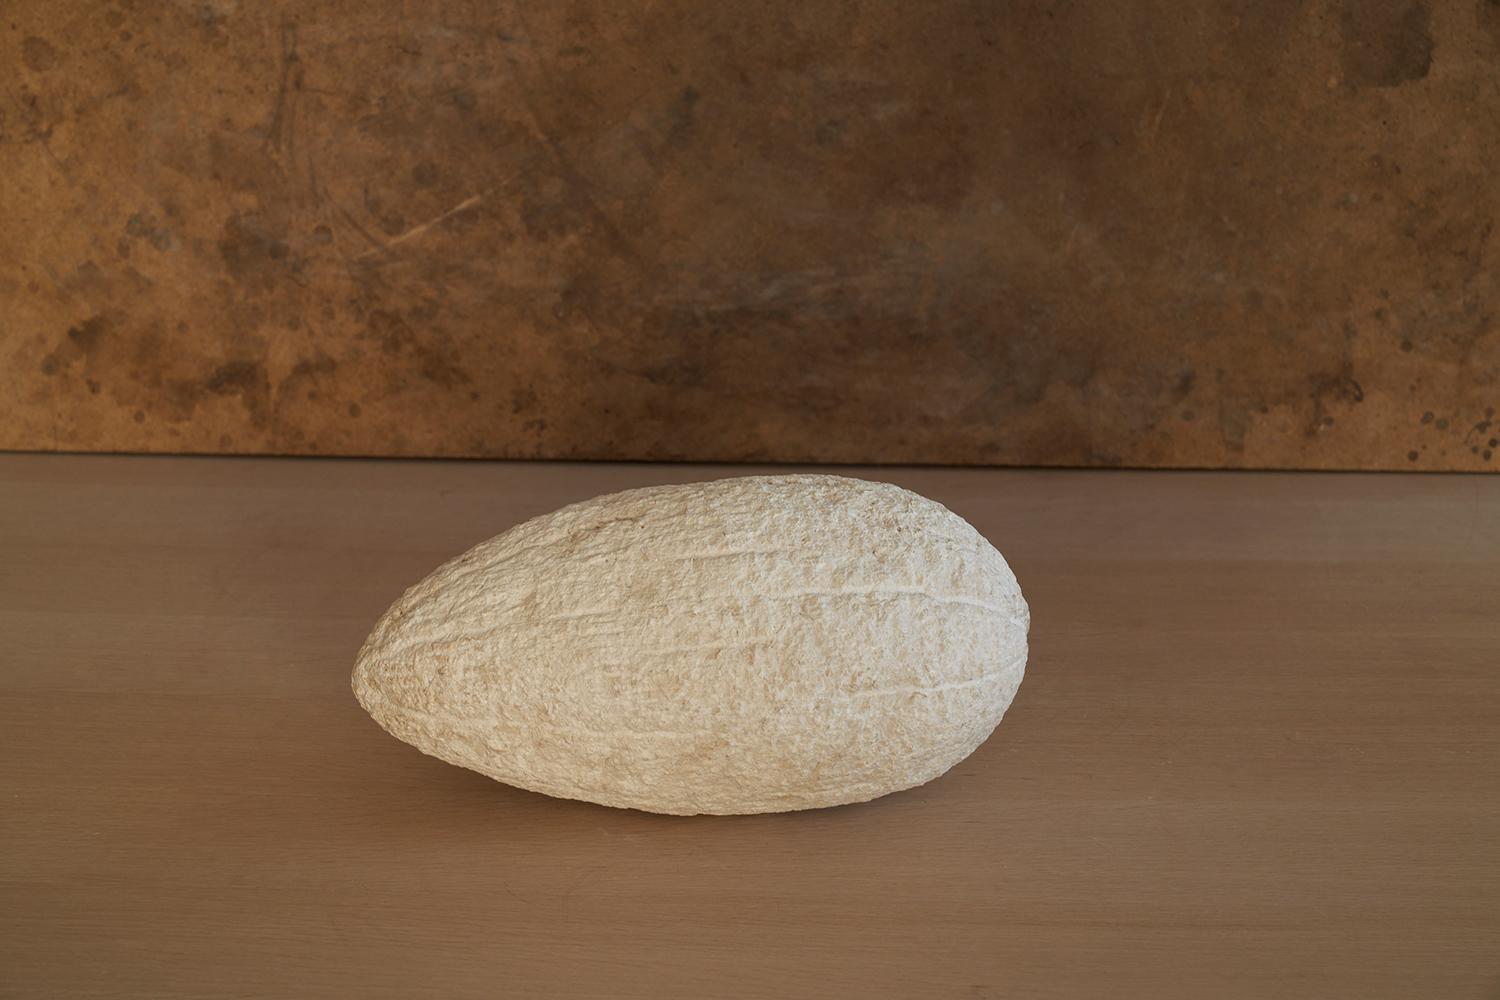 The Melon Sculpture by Jean-Baptiste Van Den Heede
Unique piece
Dimensions: W 35 x D 18 x H 18 cm
Materials: Stone.

Jean-Baptiste Van den Heede defines himself as a cabinetmaker-designer and an artist of academic training and family tradition. He